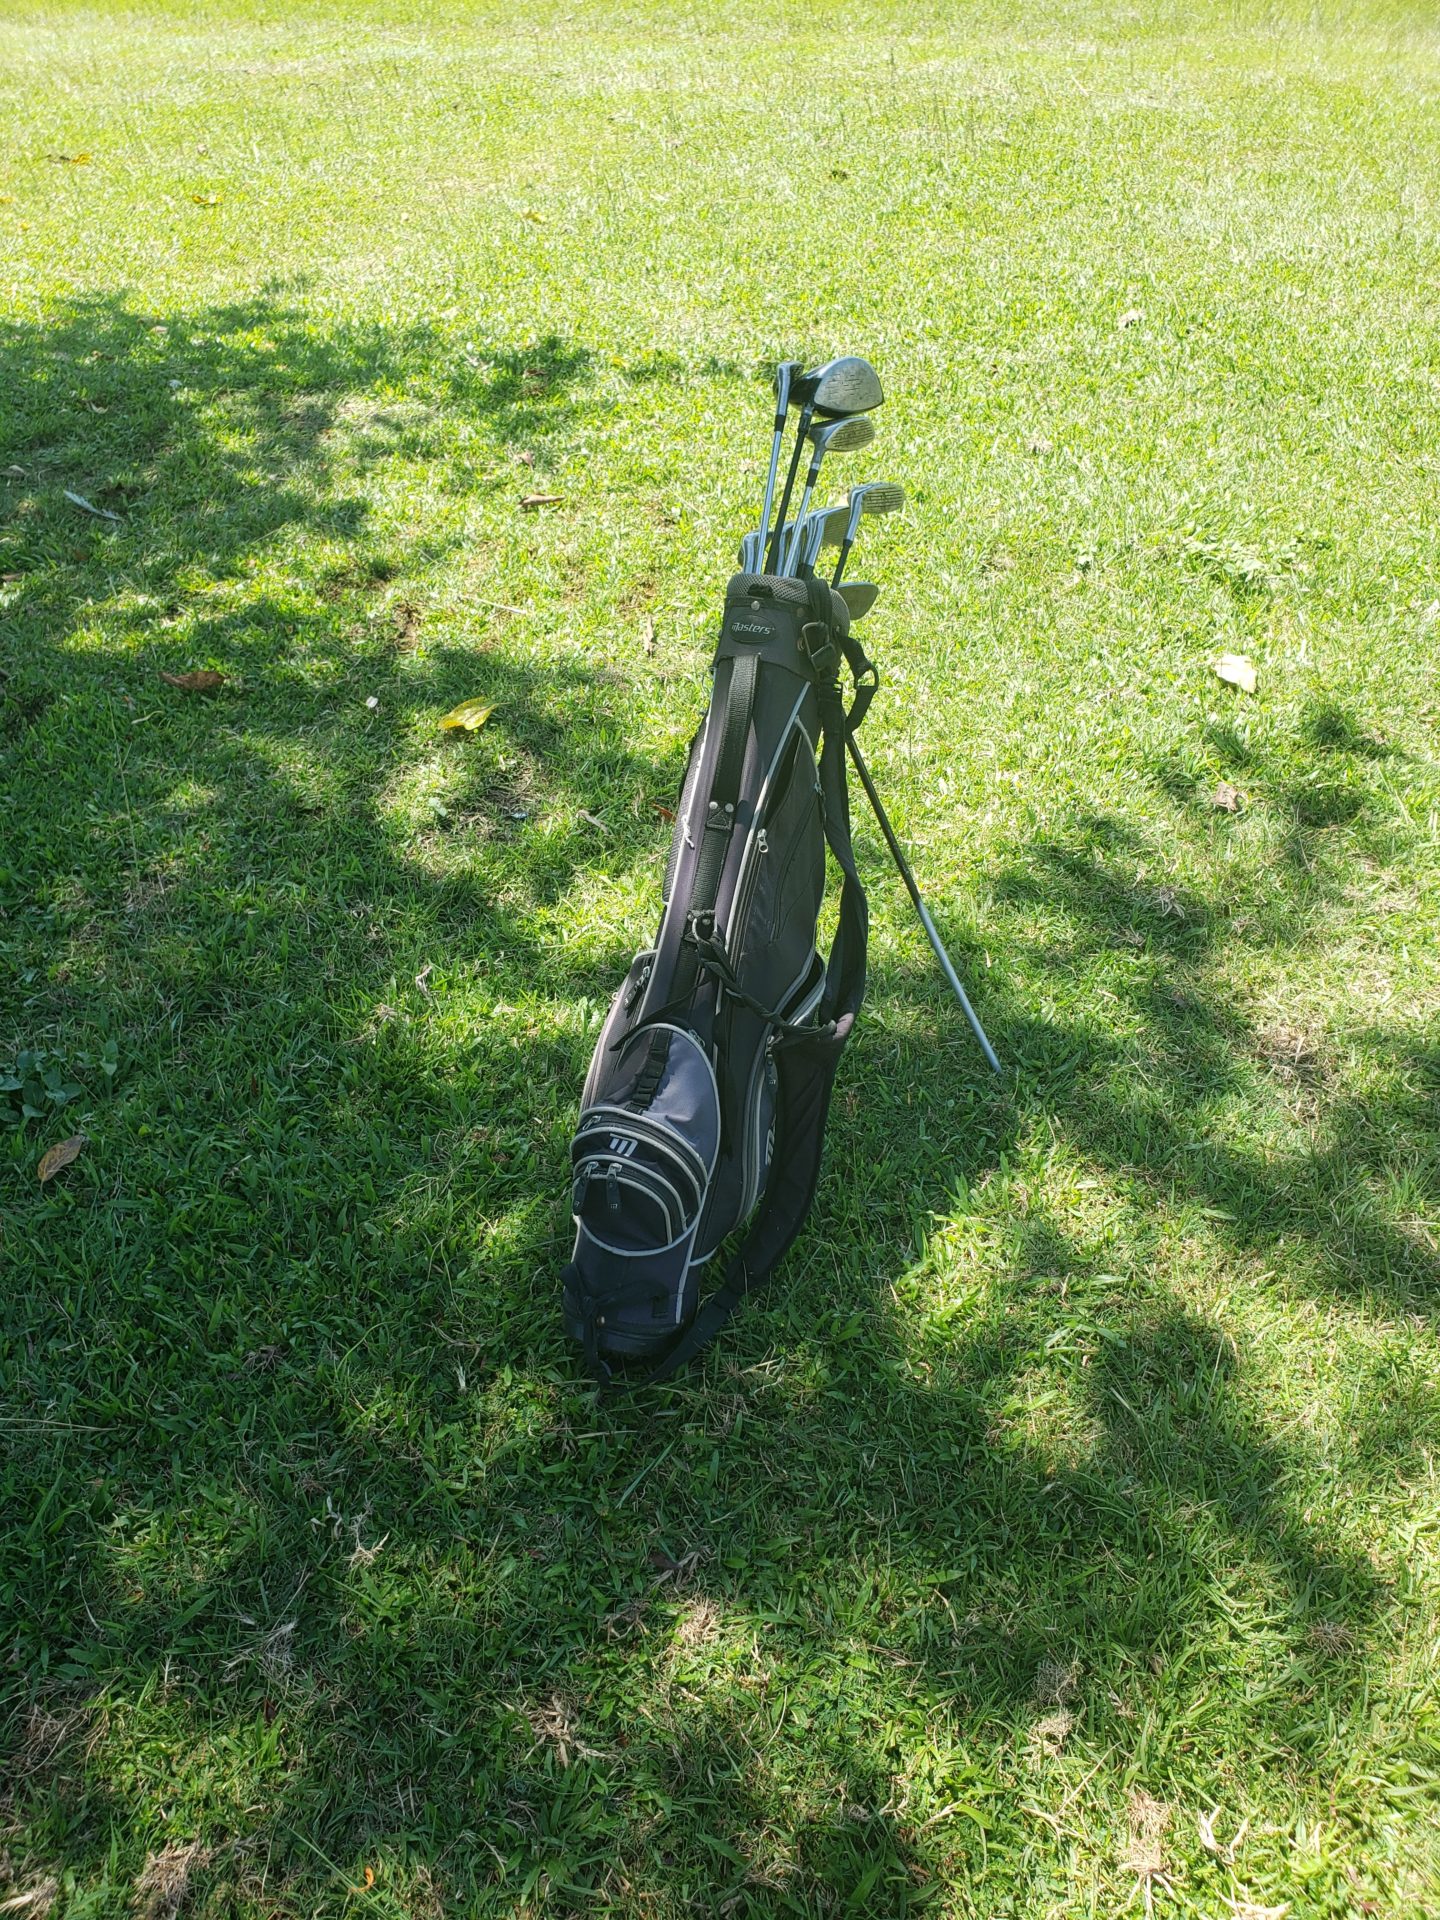 a golf bag with clubs on grass